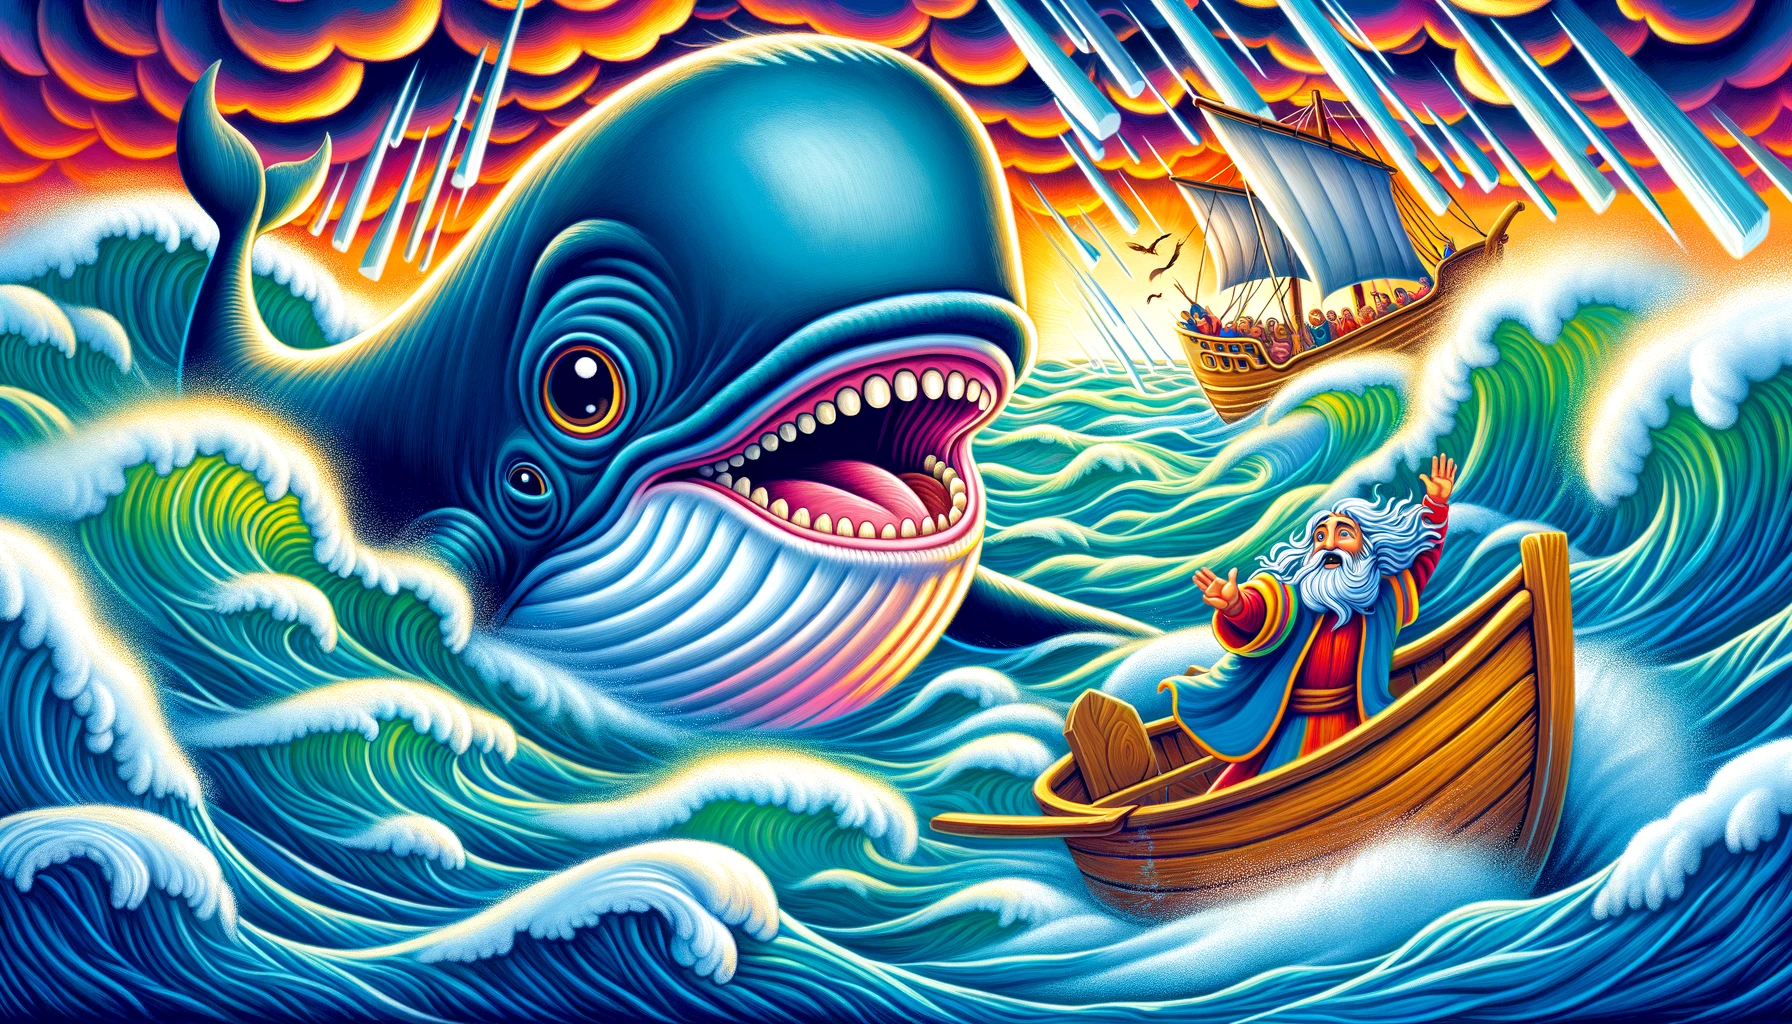 Jonah and the Whale: More Than Just A Children’s Sunday School Story